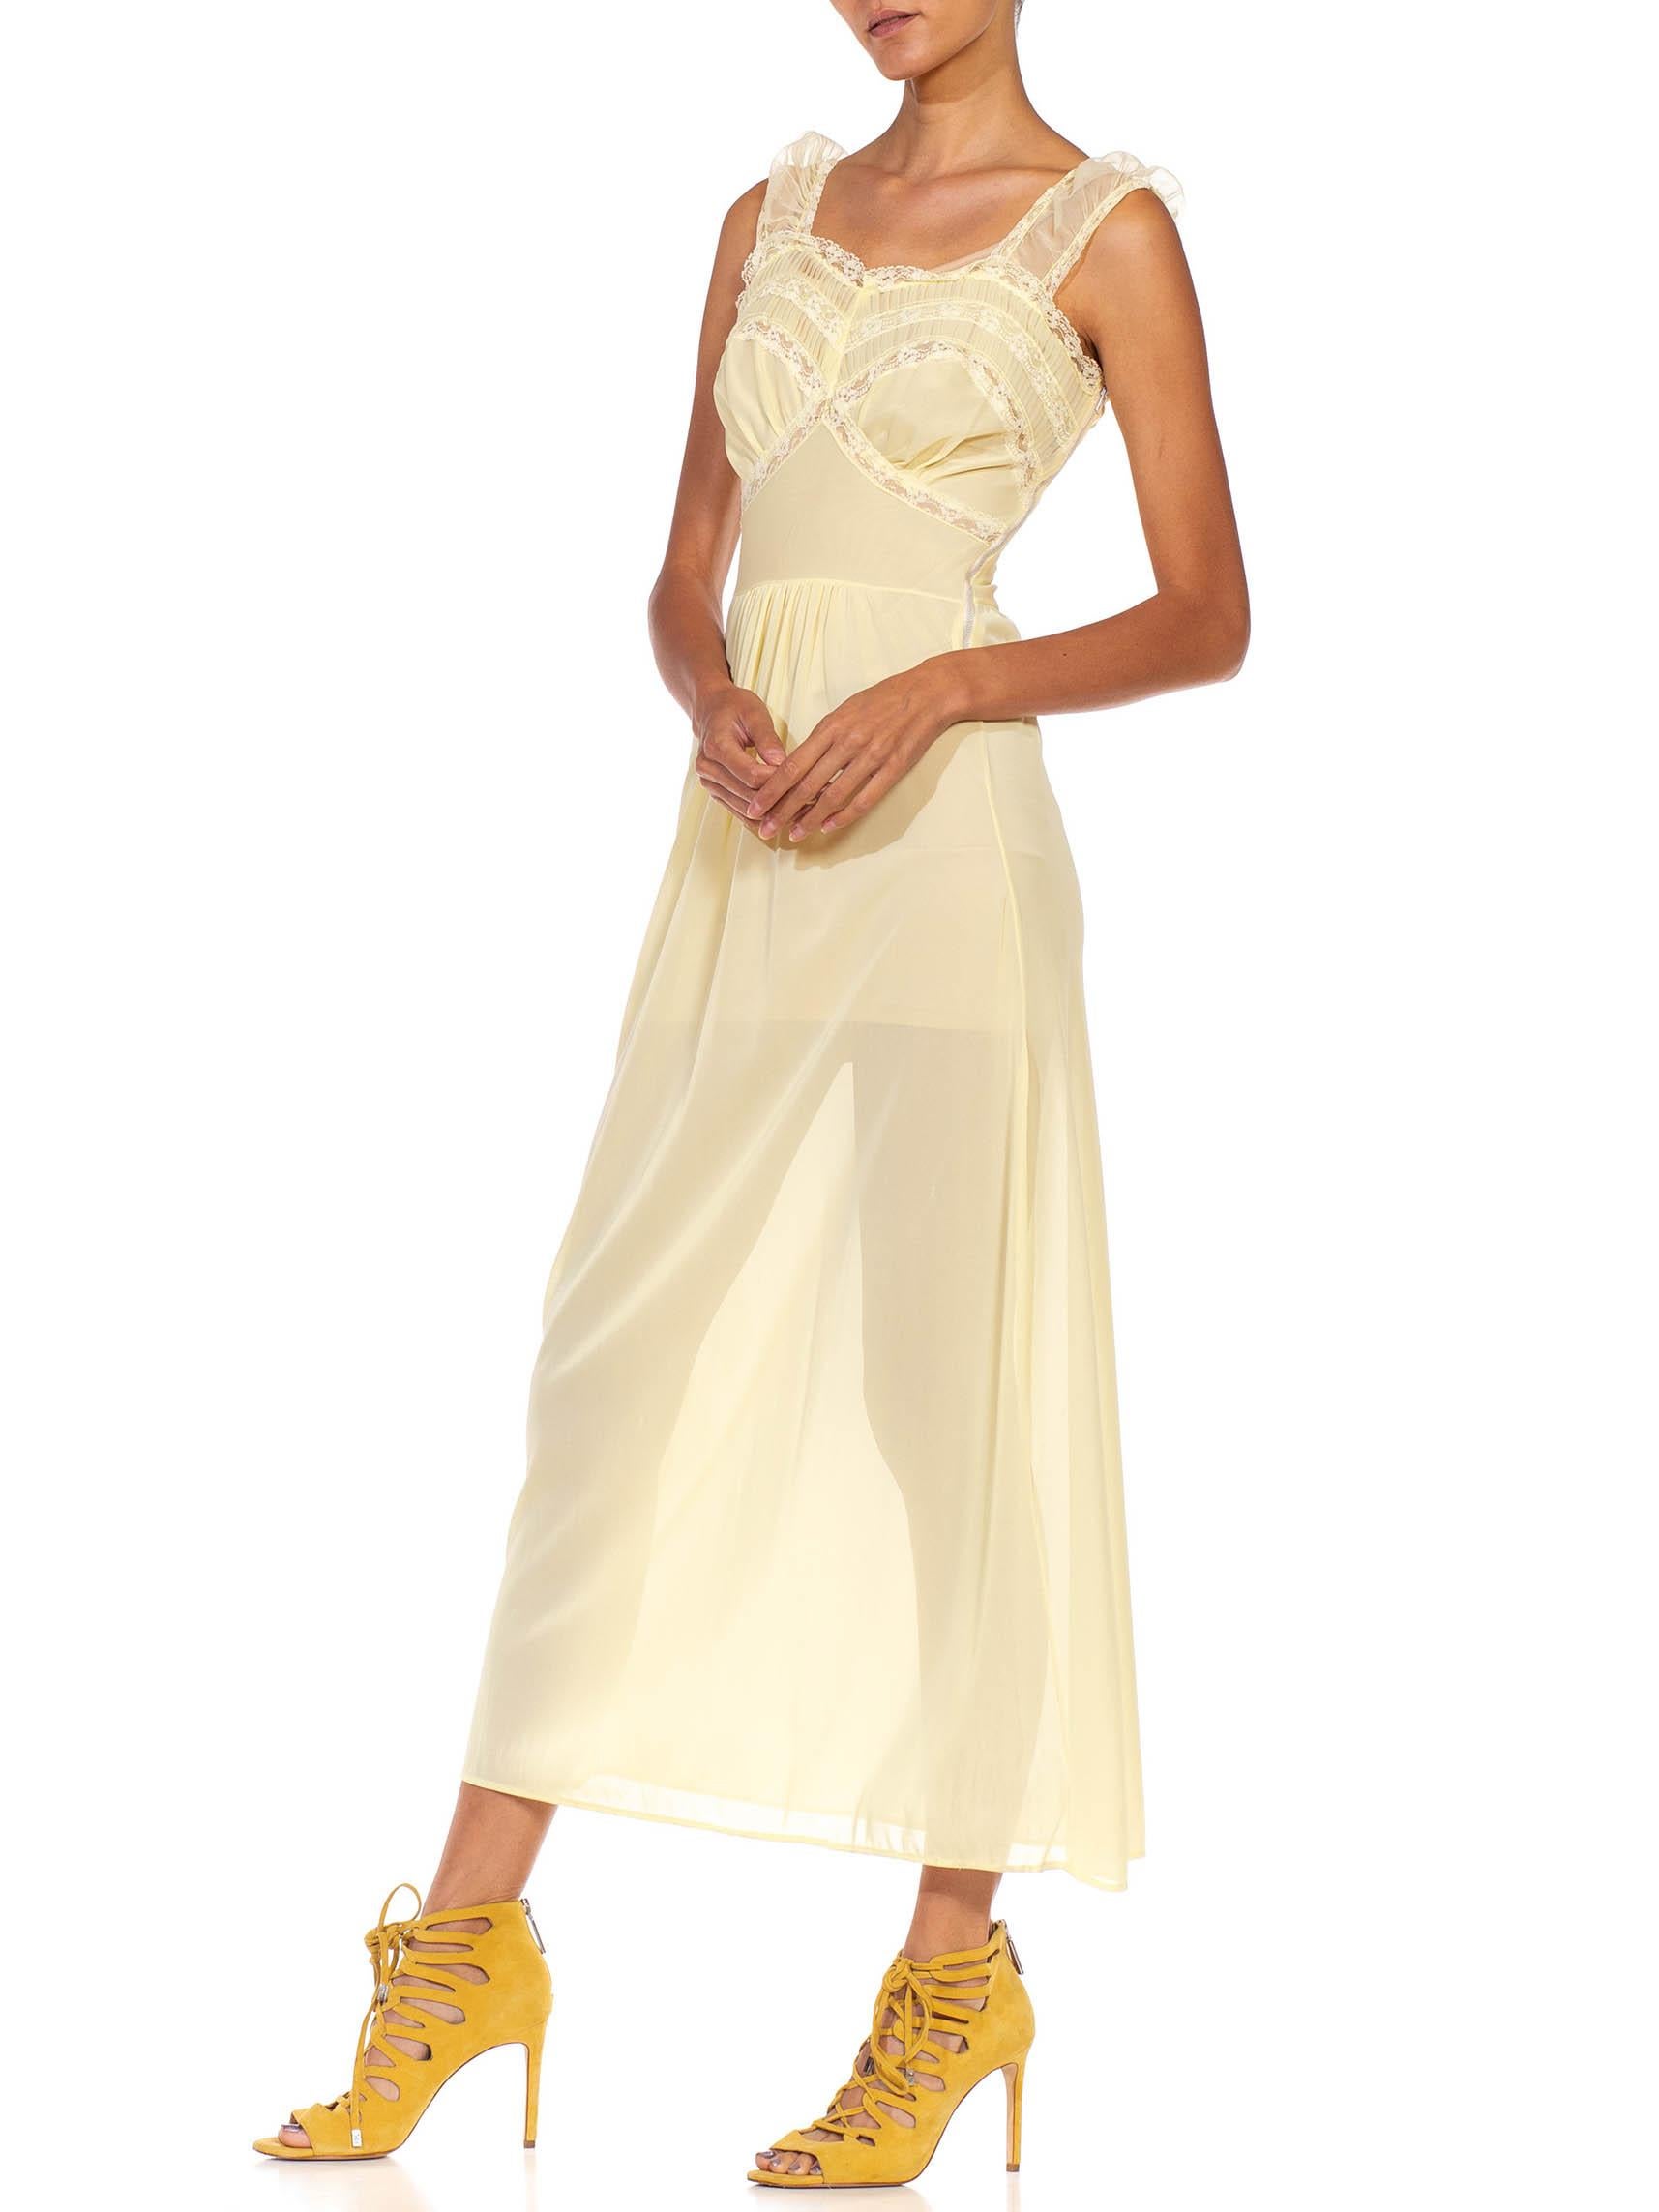 1940S Butter Yellow Rayon Lace Trim Negligee In Excellent Condition For Sale In New York, NY